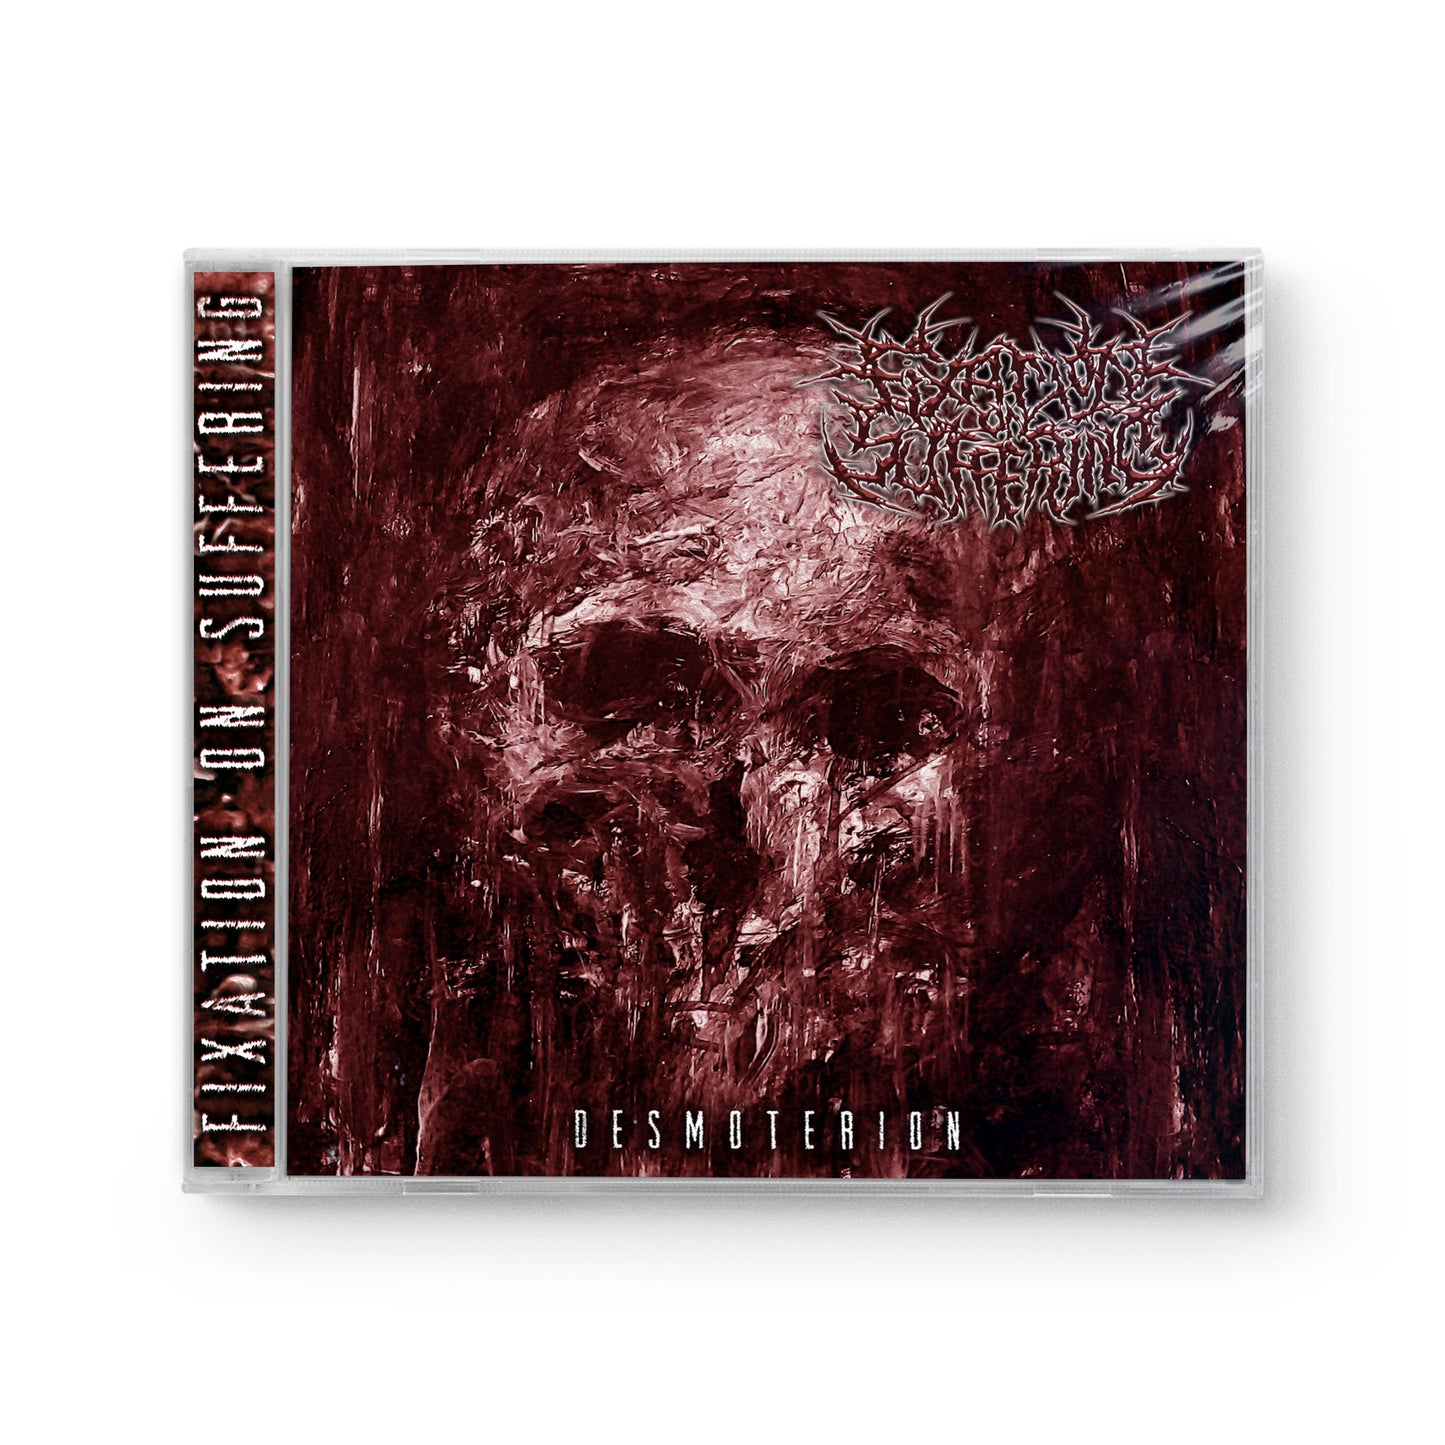 Fixation On Suffering "Desmoterion" CD